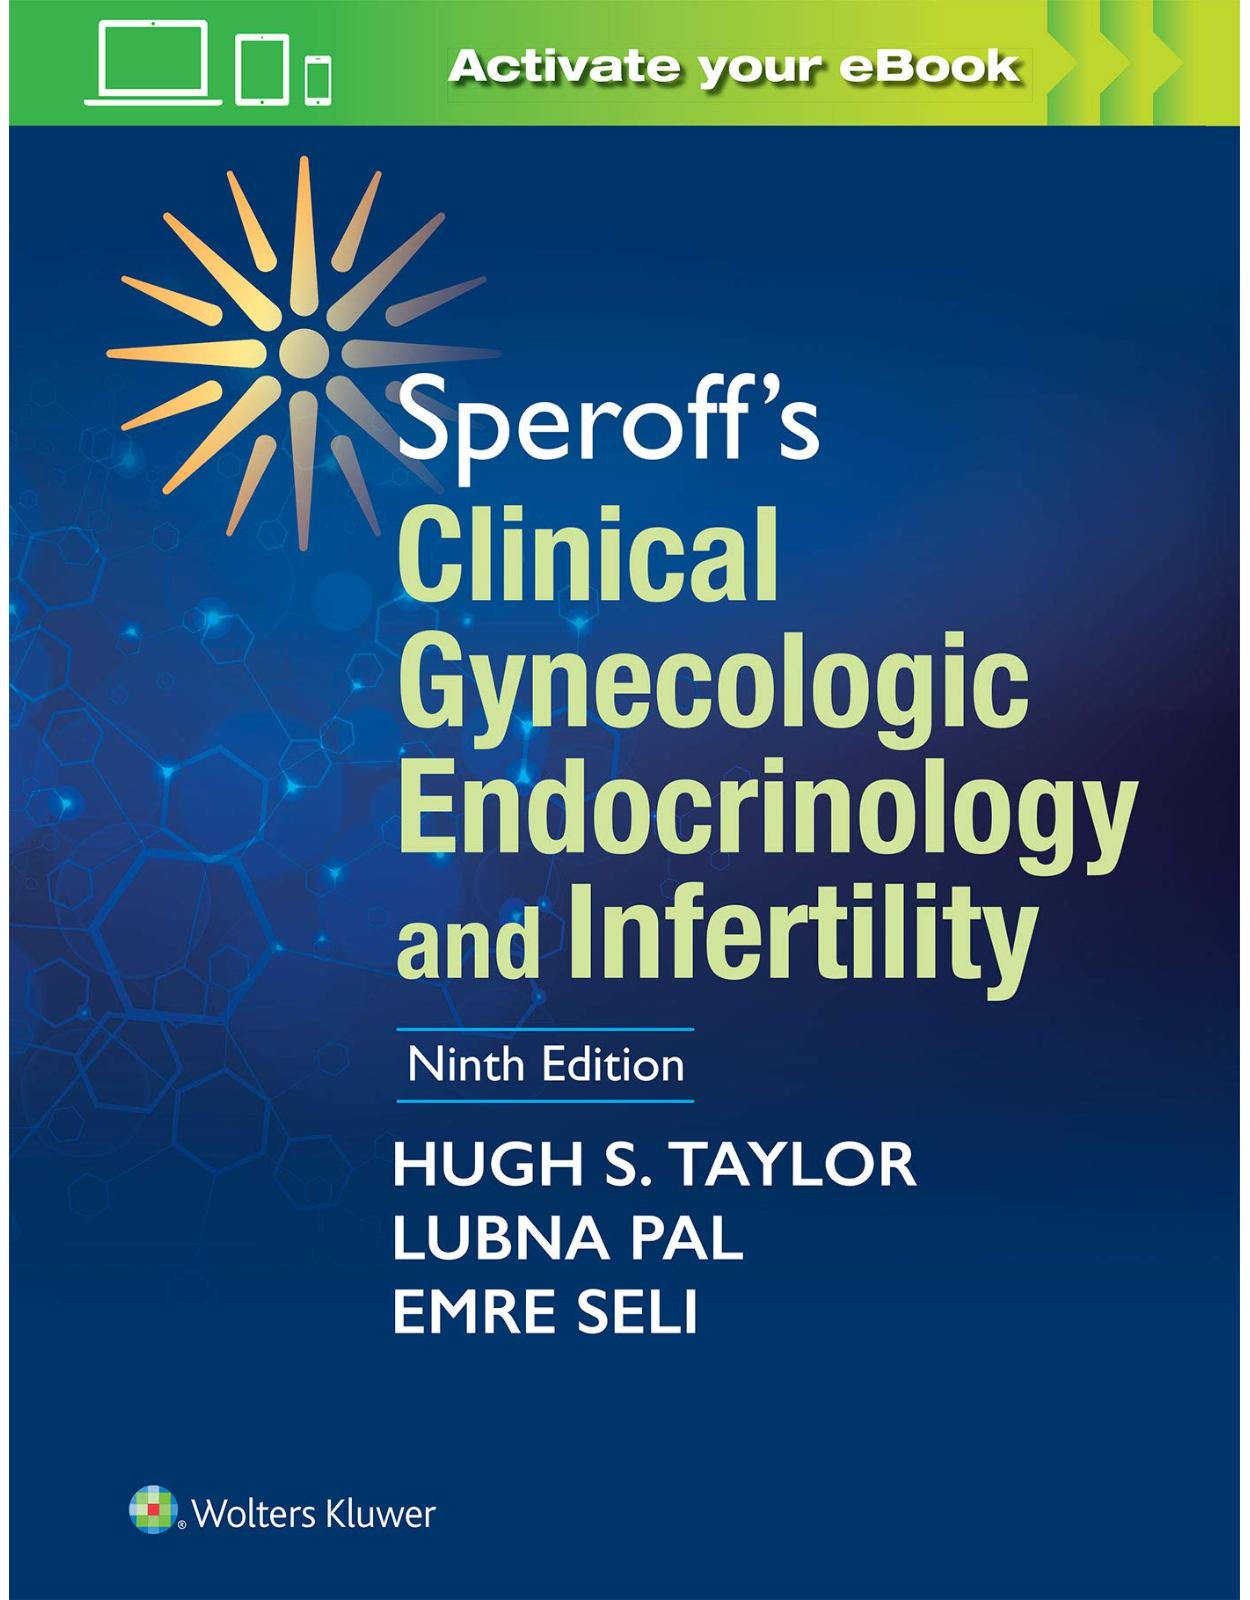 Speroff’s Clinical Gynecologic Endocrinology and Infertility